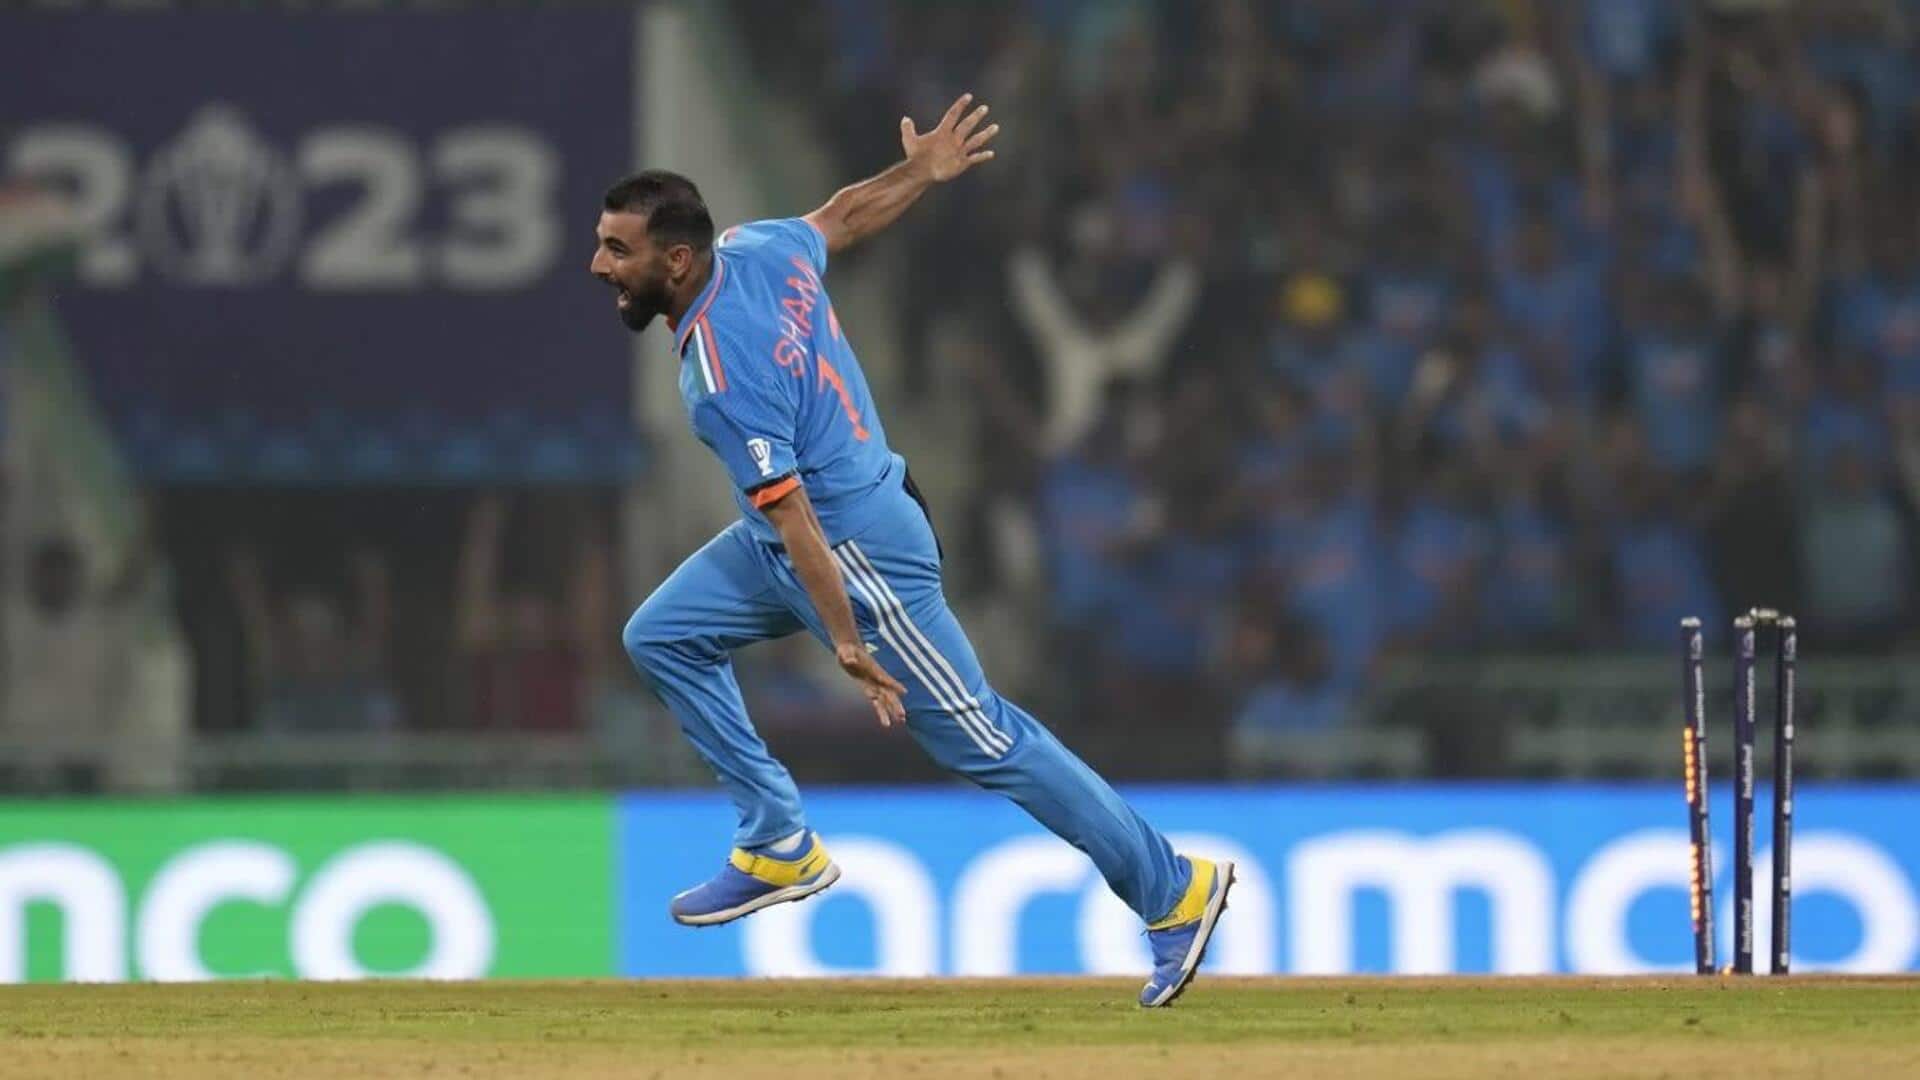 Indian cricketer Mohammed Shami recommended for Arjuna Award: Details here